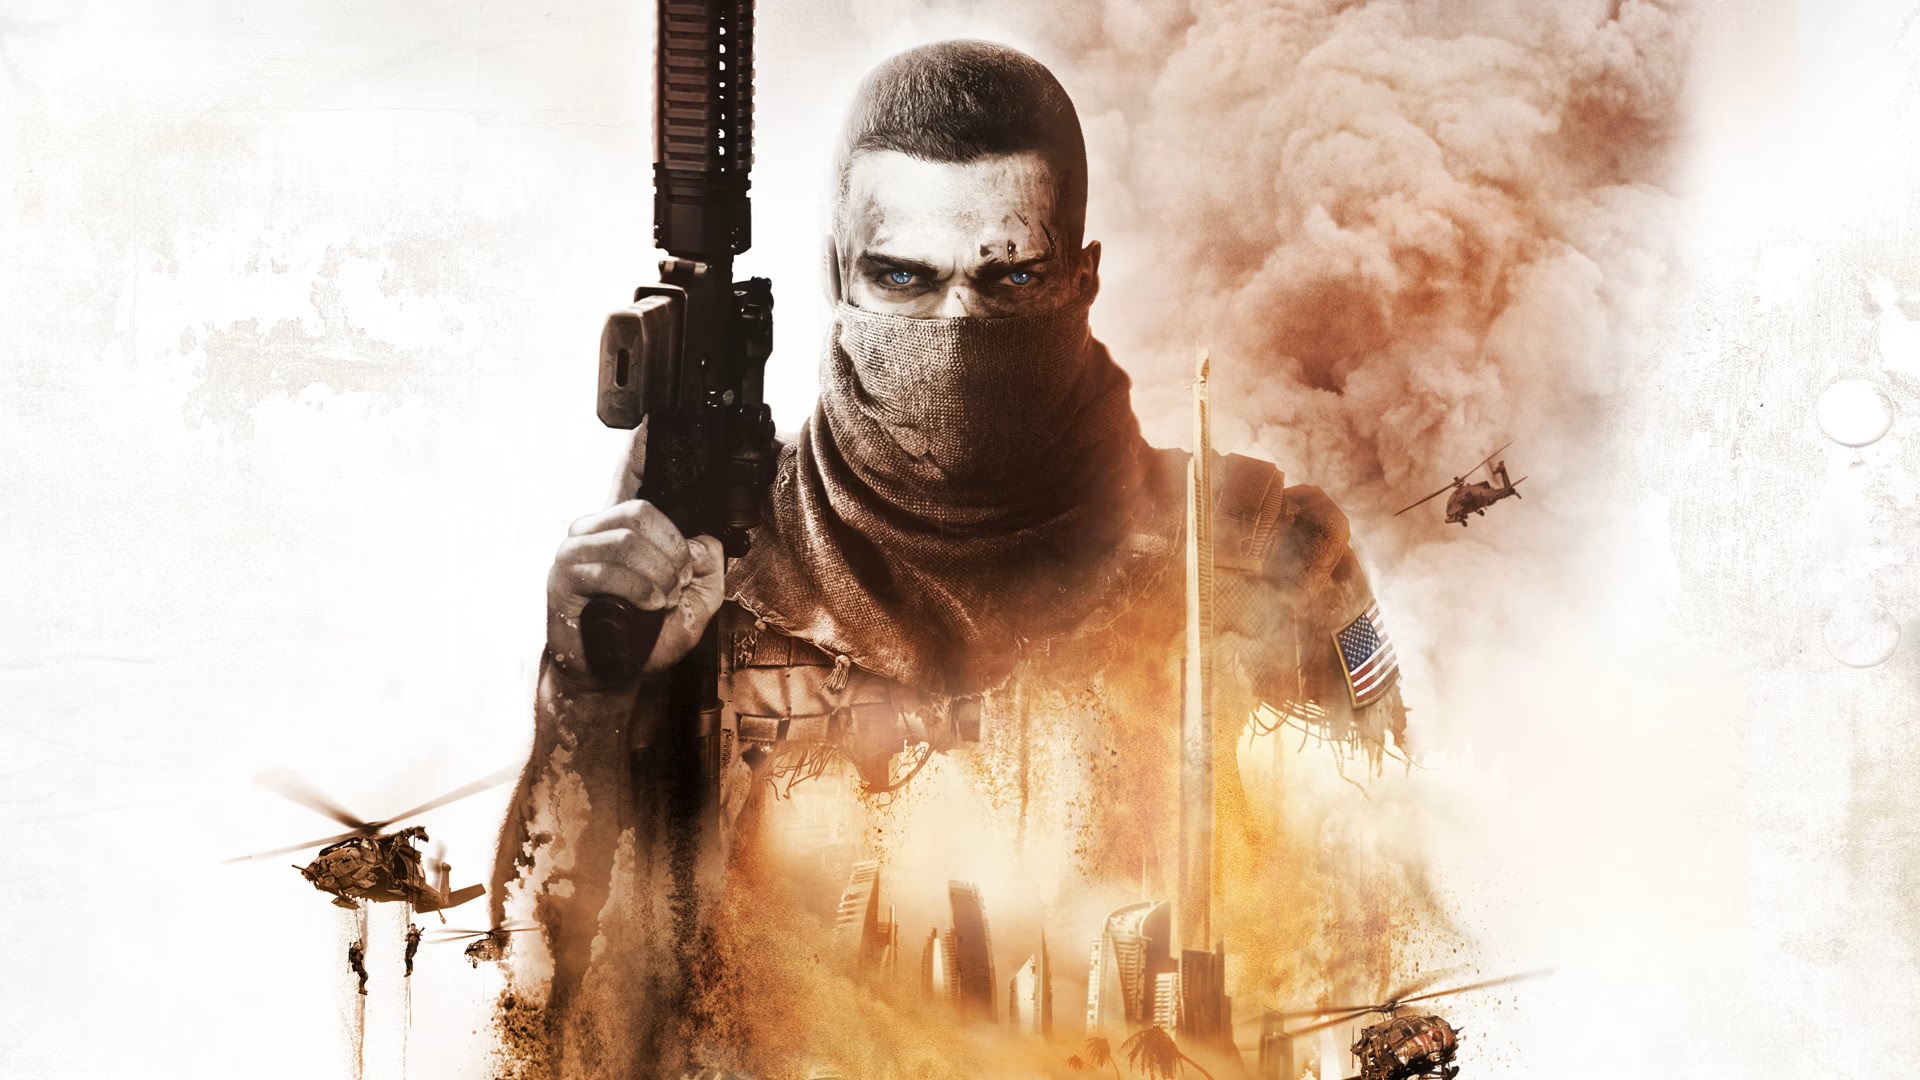 Spec Ops: The Line has been suddenly delisted from Steam